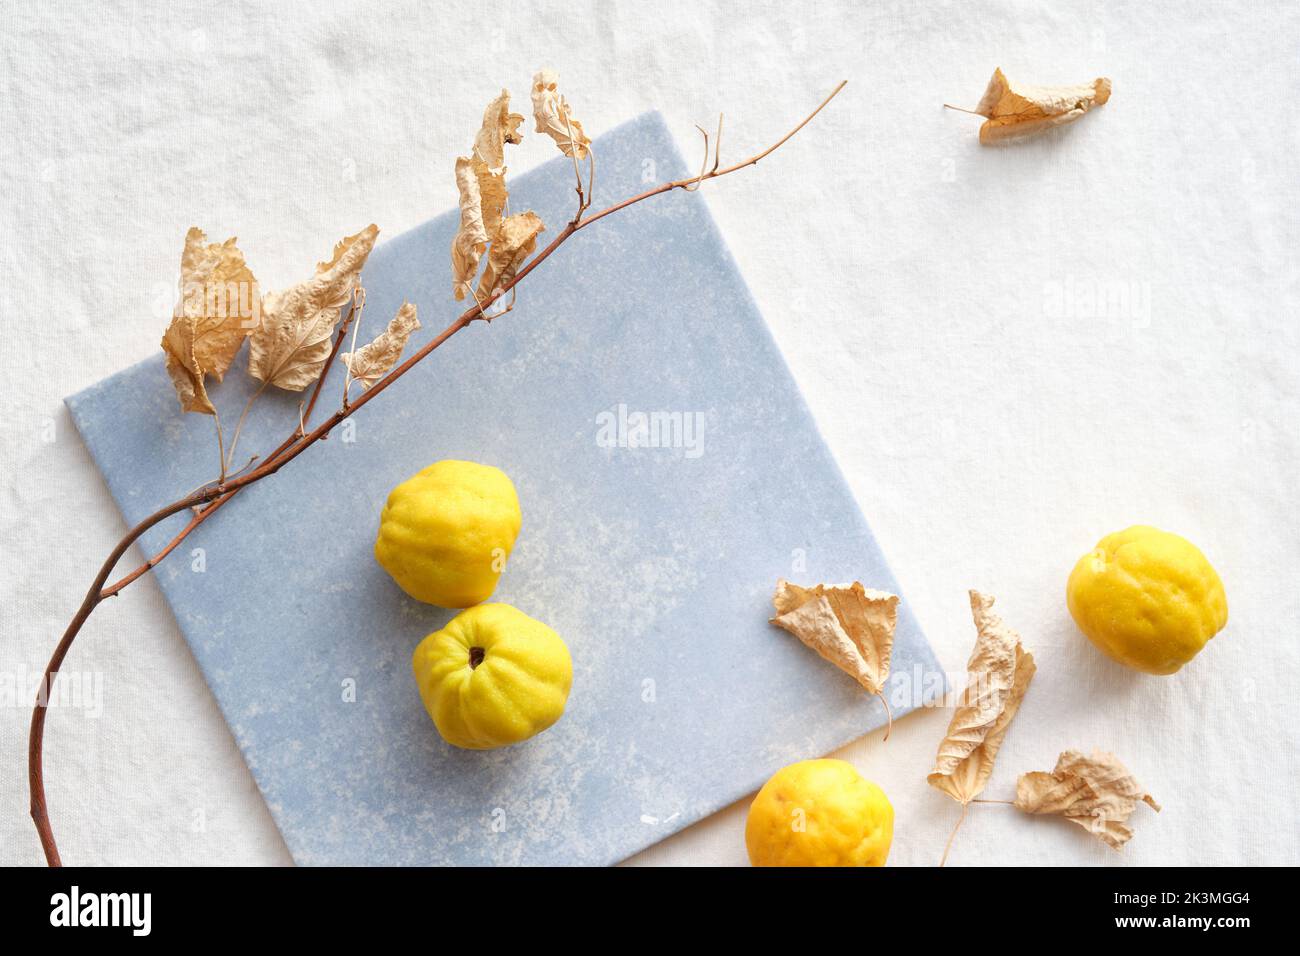 Colorful Autumn pattern with yellow quince fruits on blue ceramic tile. Seasonal Fall still life arrangement on off white cotton textile tabletop. Dry Stock Photo